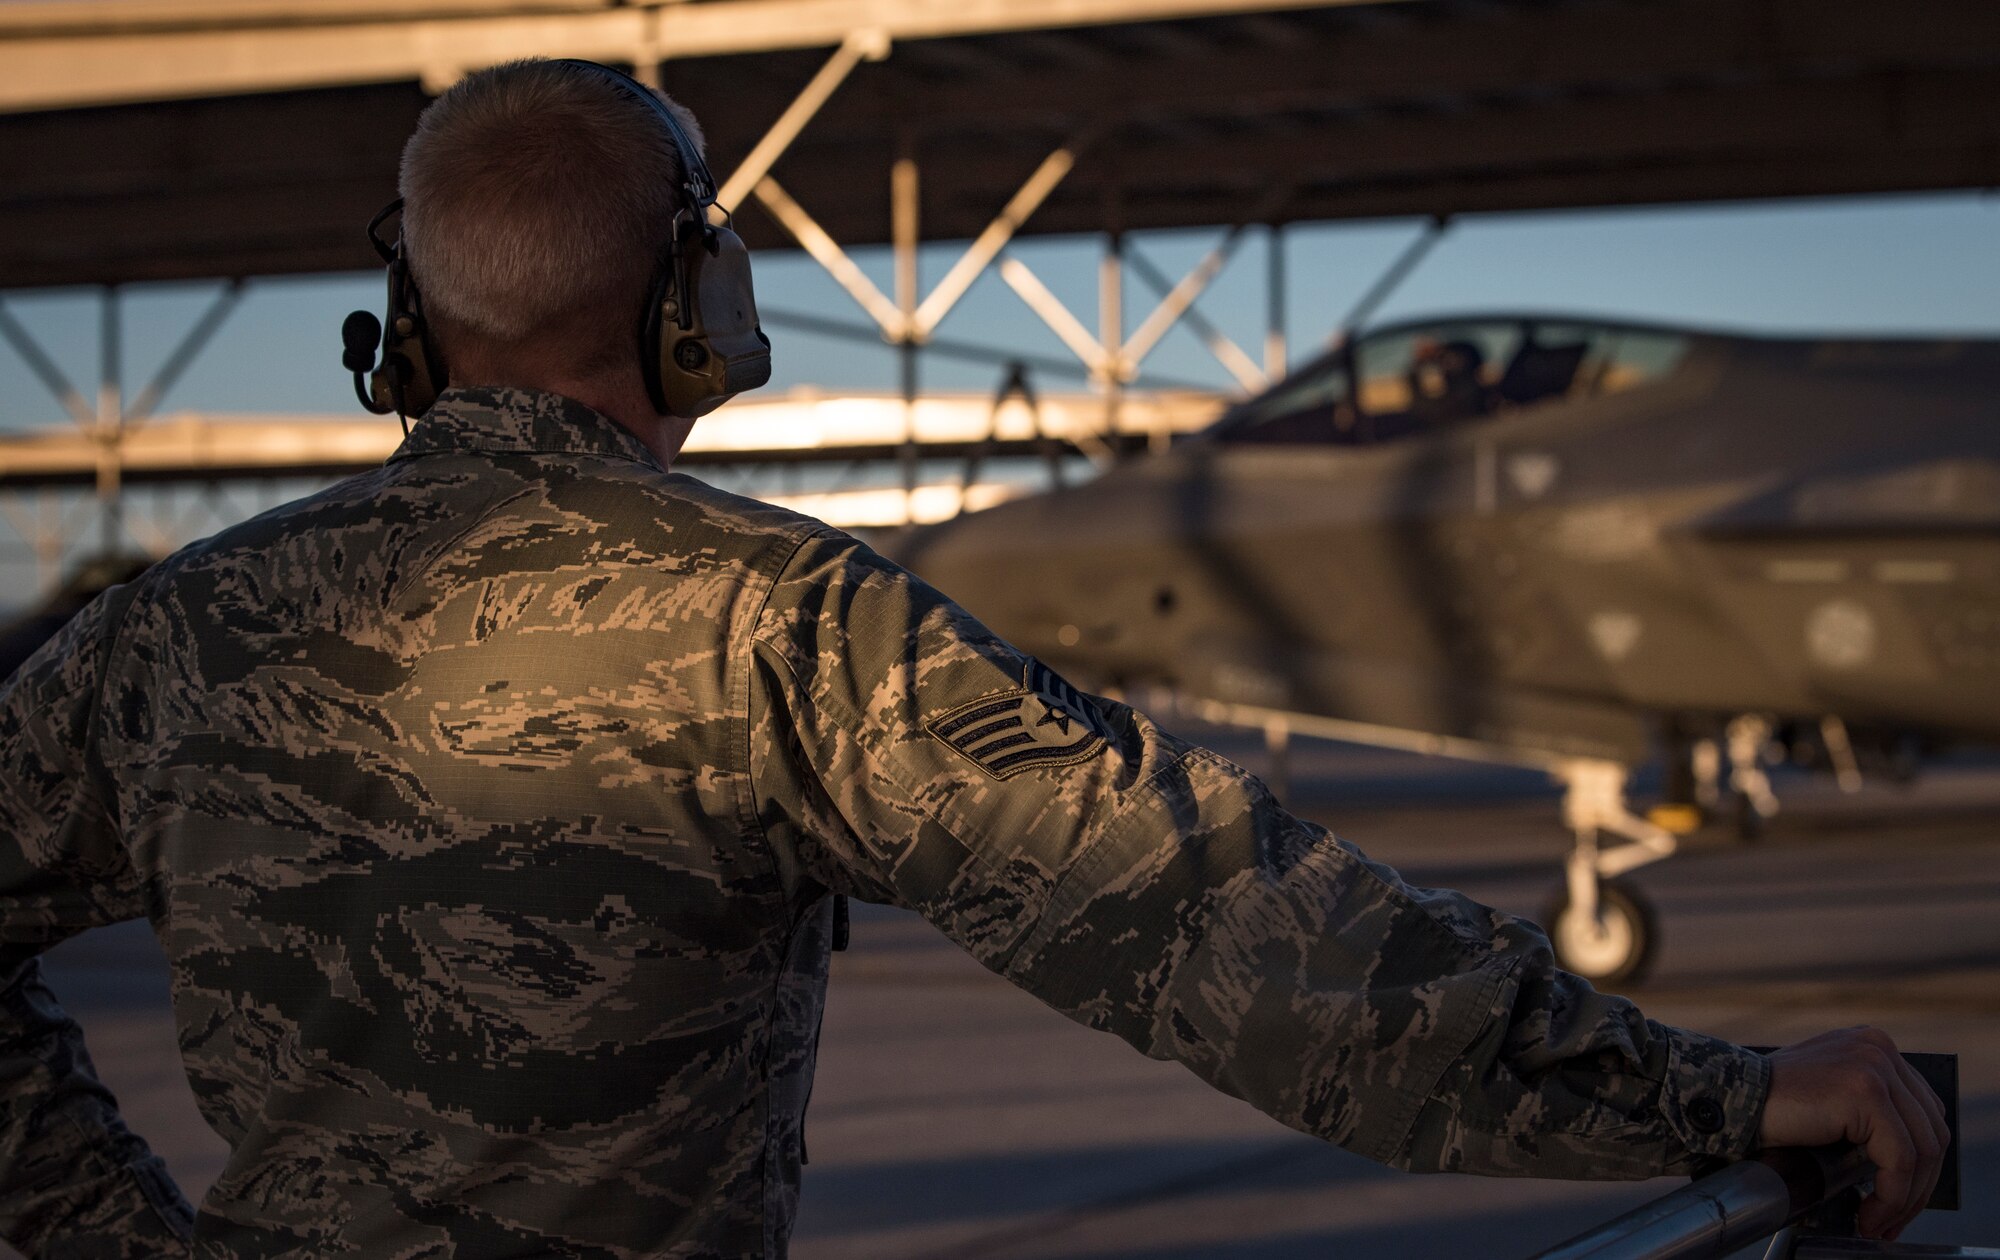 Staff Sgt. Joshua Harris, 57th Aircraft Maintenance Squadron Lightning Aircraft Maintenance Unit activity security manager, observes an F-35A Lightning II fighter jet taxi to the runway at Nellis Air Force Base, Nevada, July 23, 2018. Harris previously worked on A-10 Thunderbolt II close air support aircraft before transitioning to the F-35A. (U.S. Air Force photo by Airman 1st Class Andrew D. Sarver)